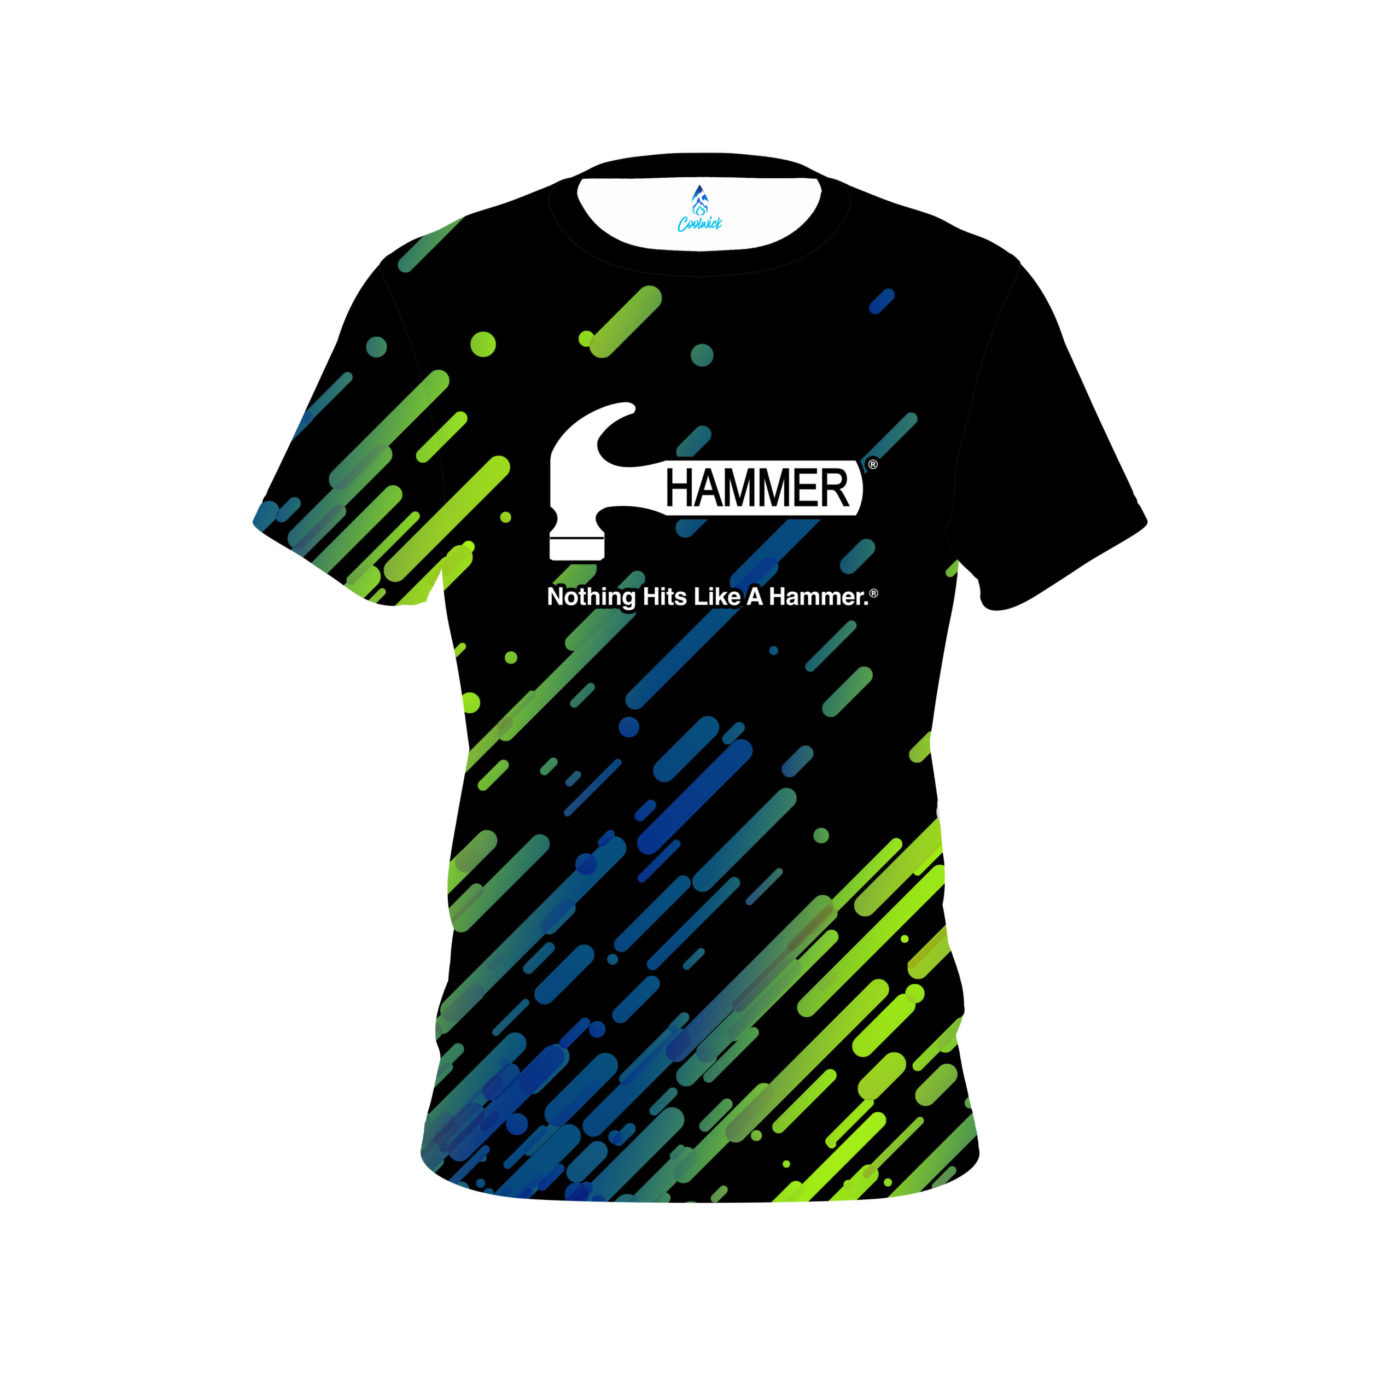 Even though this is a hammer shirt can we change the hammer logo to Motiv?